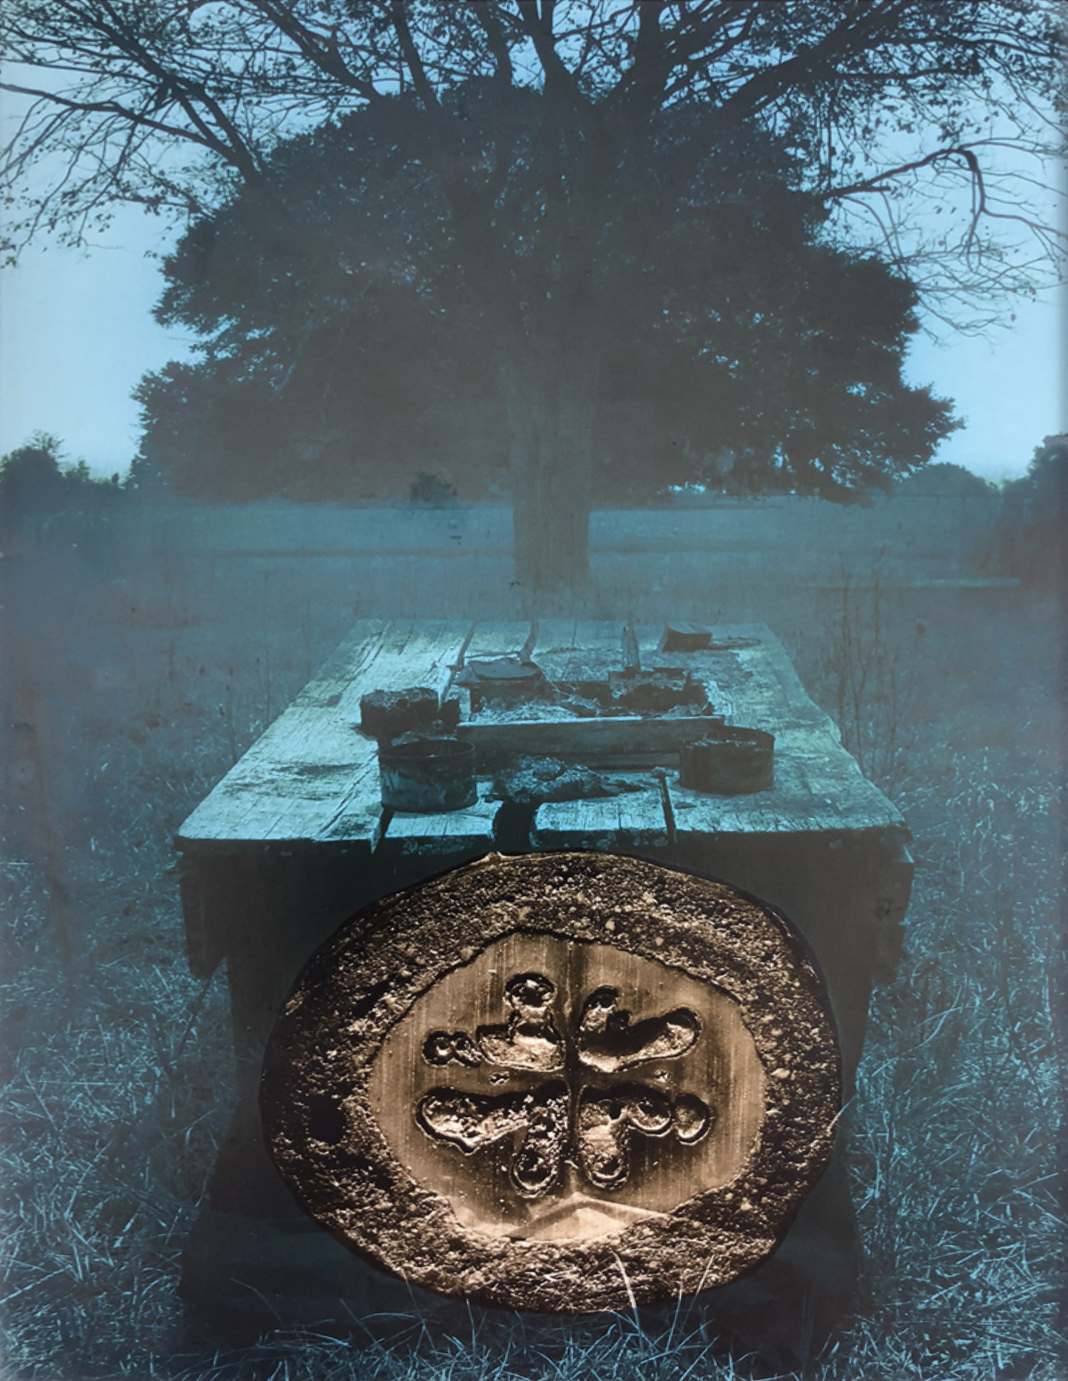 Untitled, 1968 - Tree, Nut, and Table